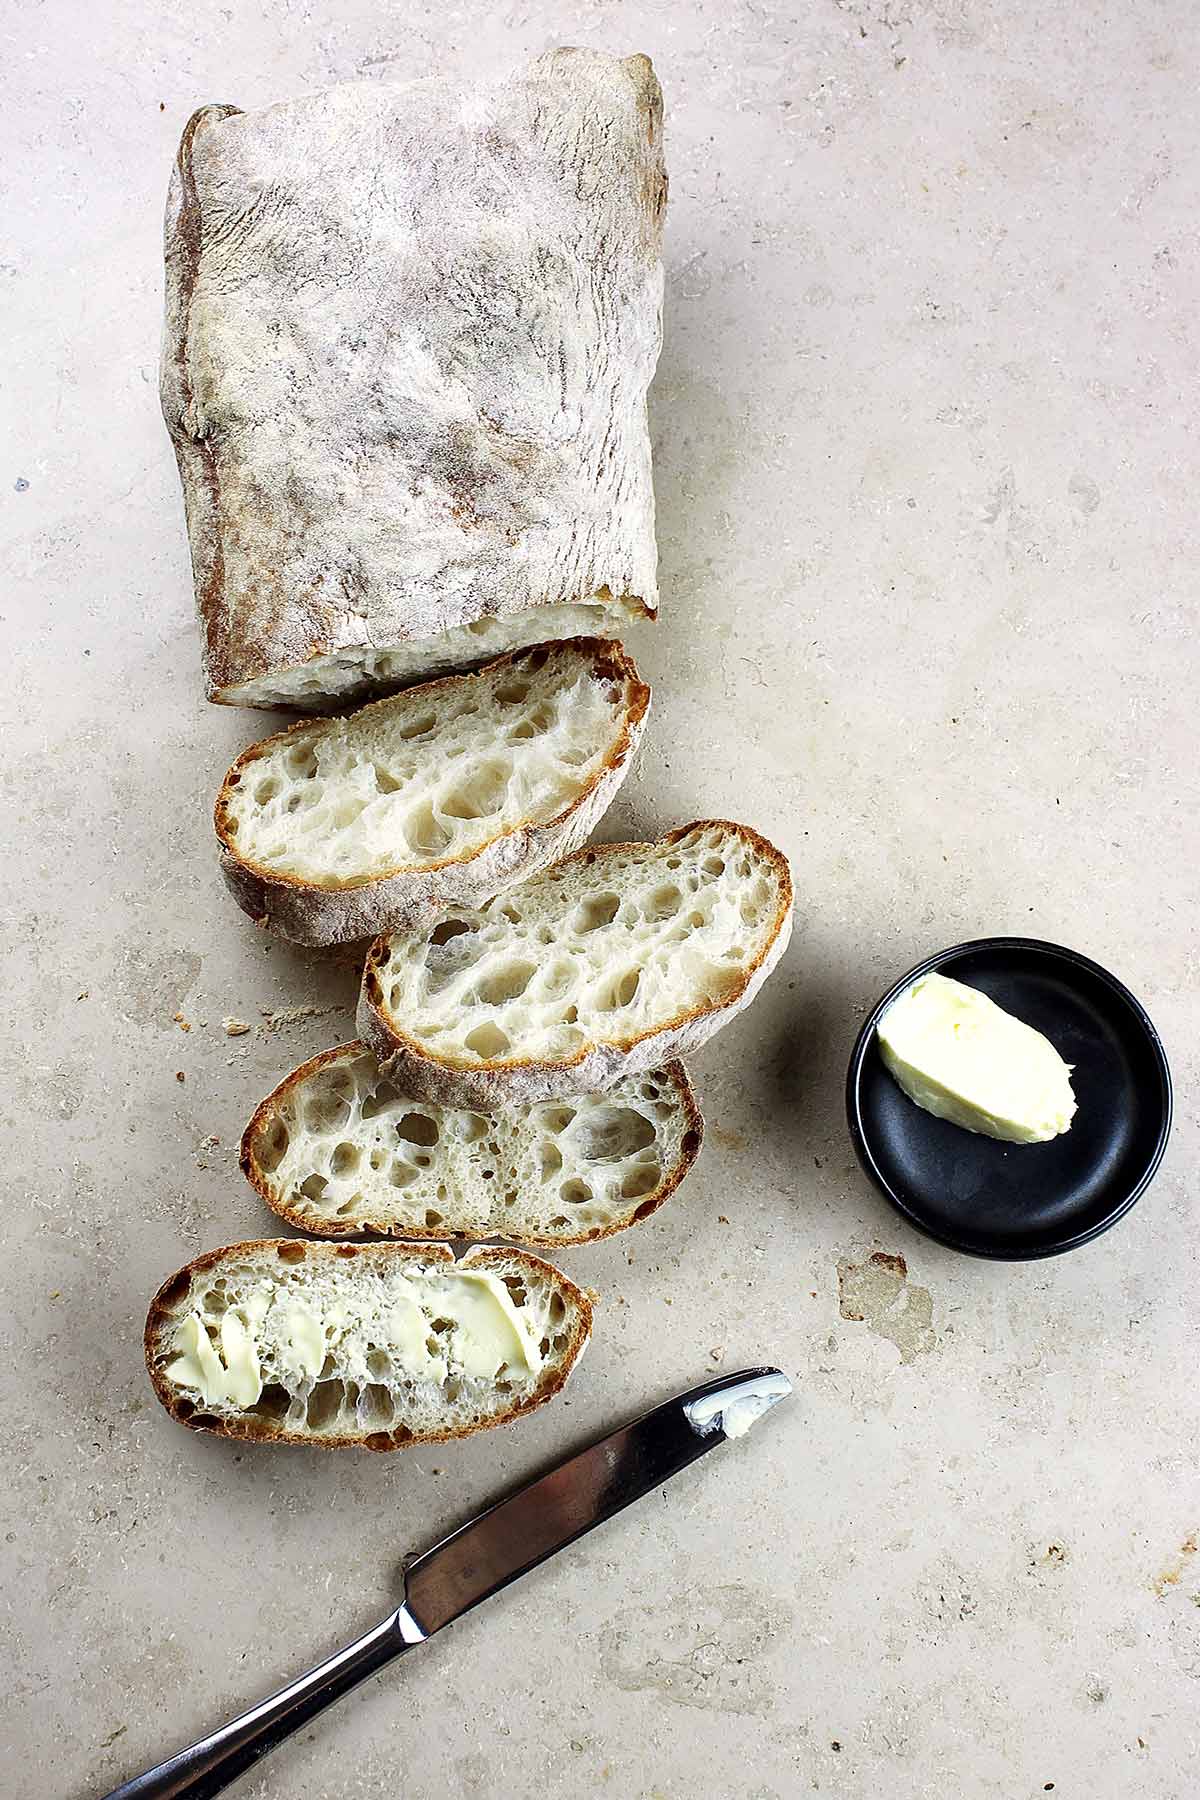 Loaf of bread sliced with knife and butter - carbohydrates